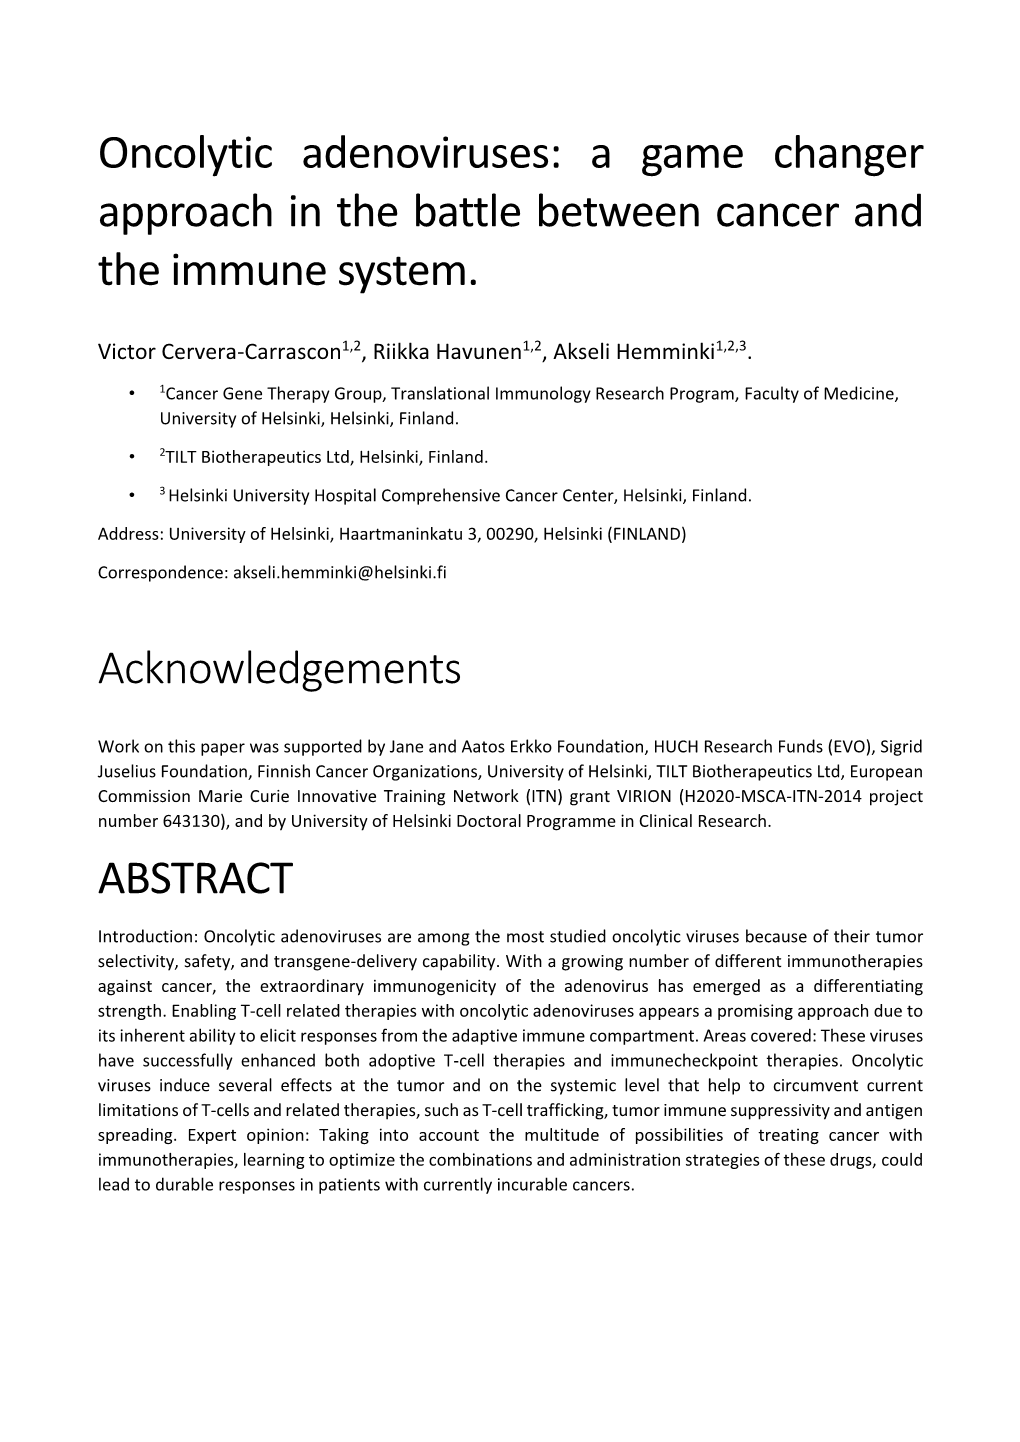 Oncolytic Adenoviruses: a Game Changer Approach in the Battle Between Cancer and the Immune System